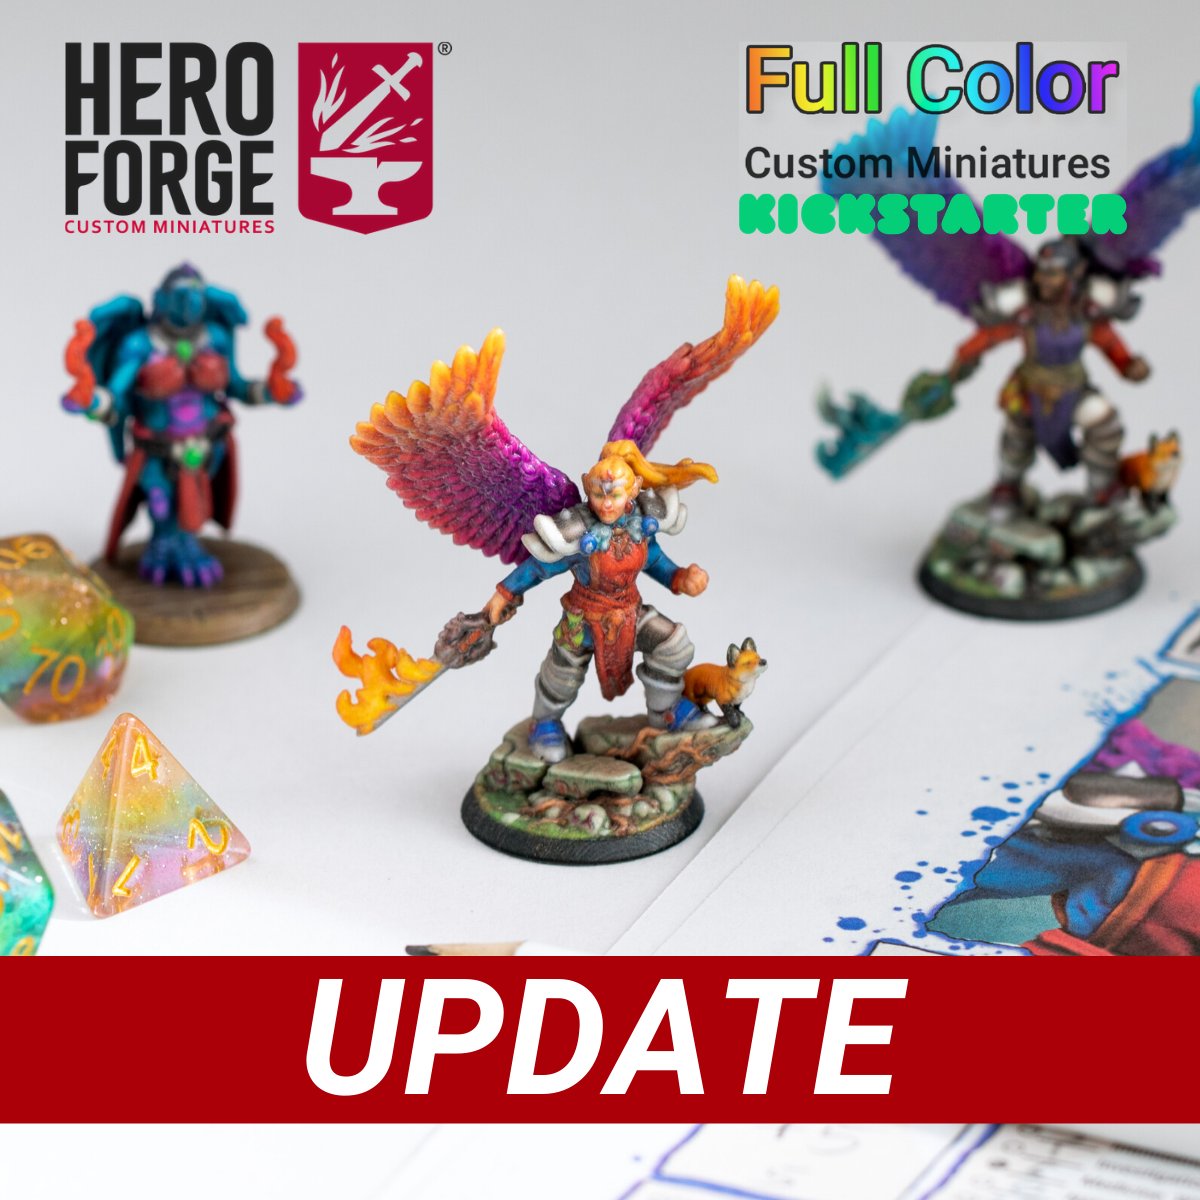 Redemption code is redeemed into your Hero Forge account, you will have acc...